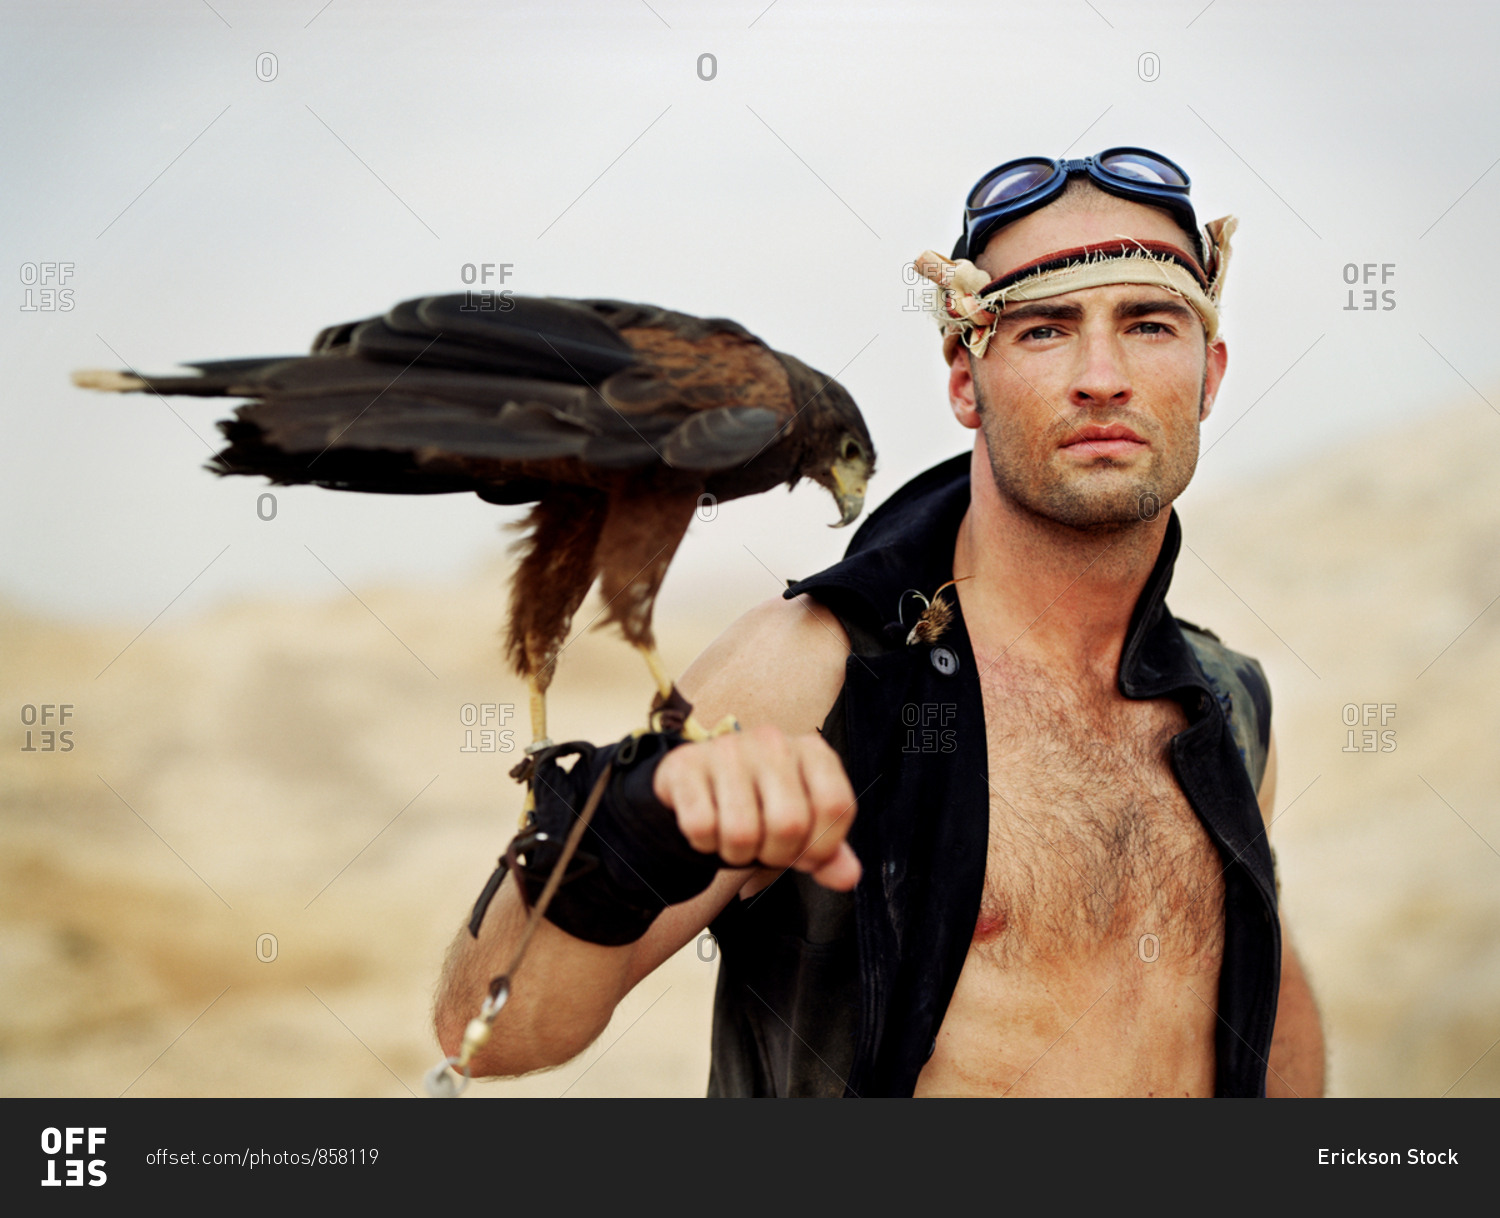 Portrait of an adventurous young man holding a bird of prey on his wrist while standing in a desert.